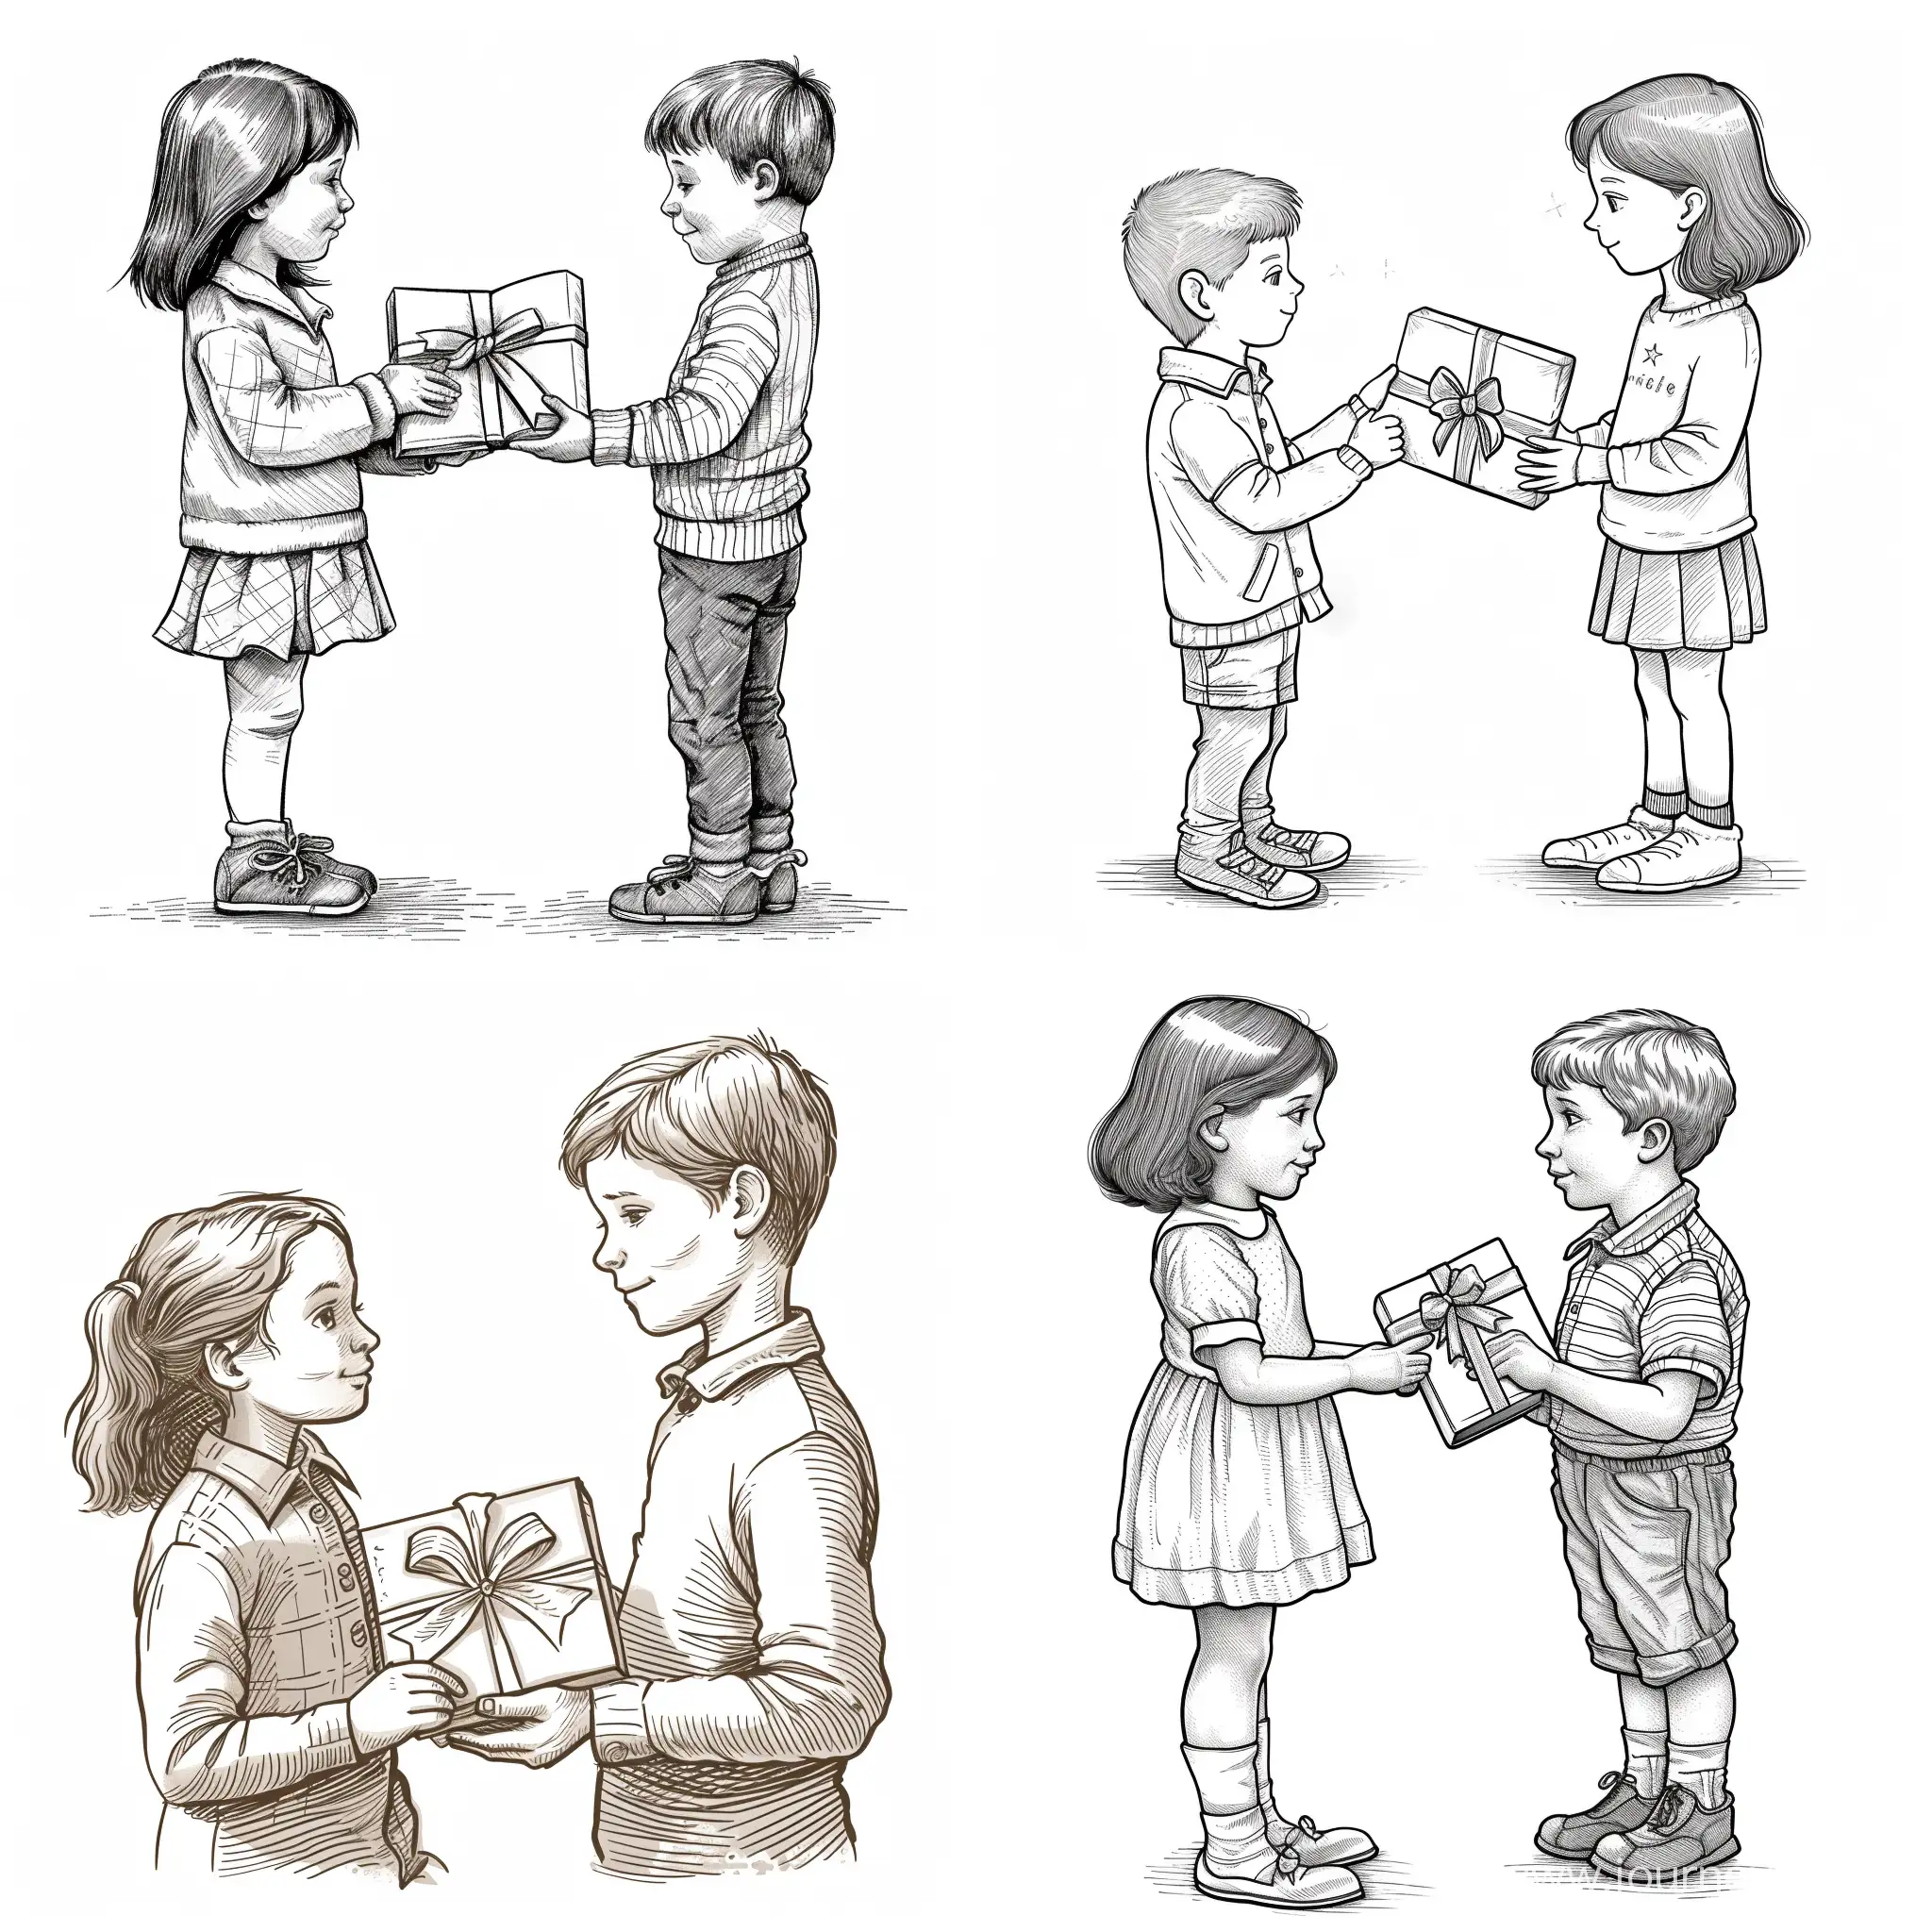 Charming-HandDrawn-Illustration-Sweet-Moment-of-Generosity-Between-an-8YearOld-Girl-and-a-7YearOld-Boy